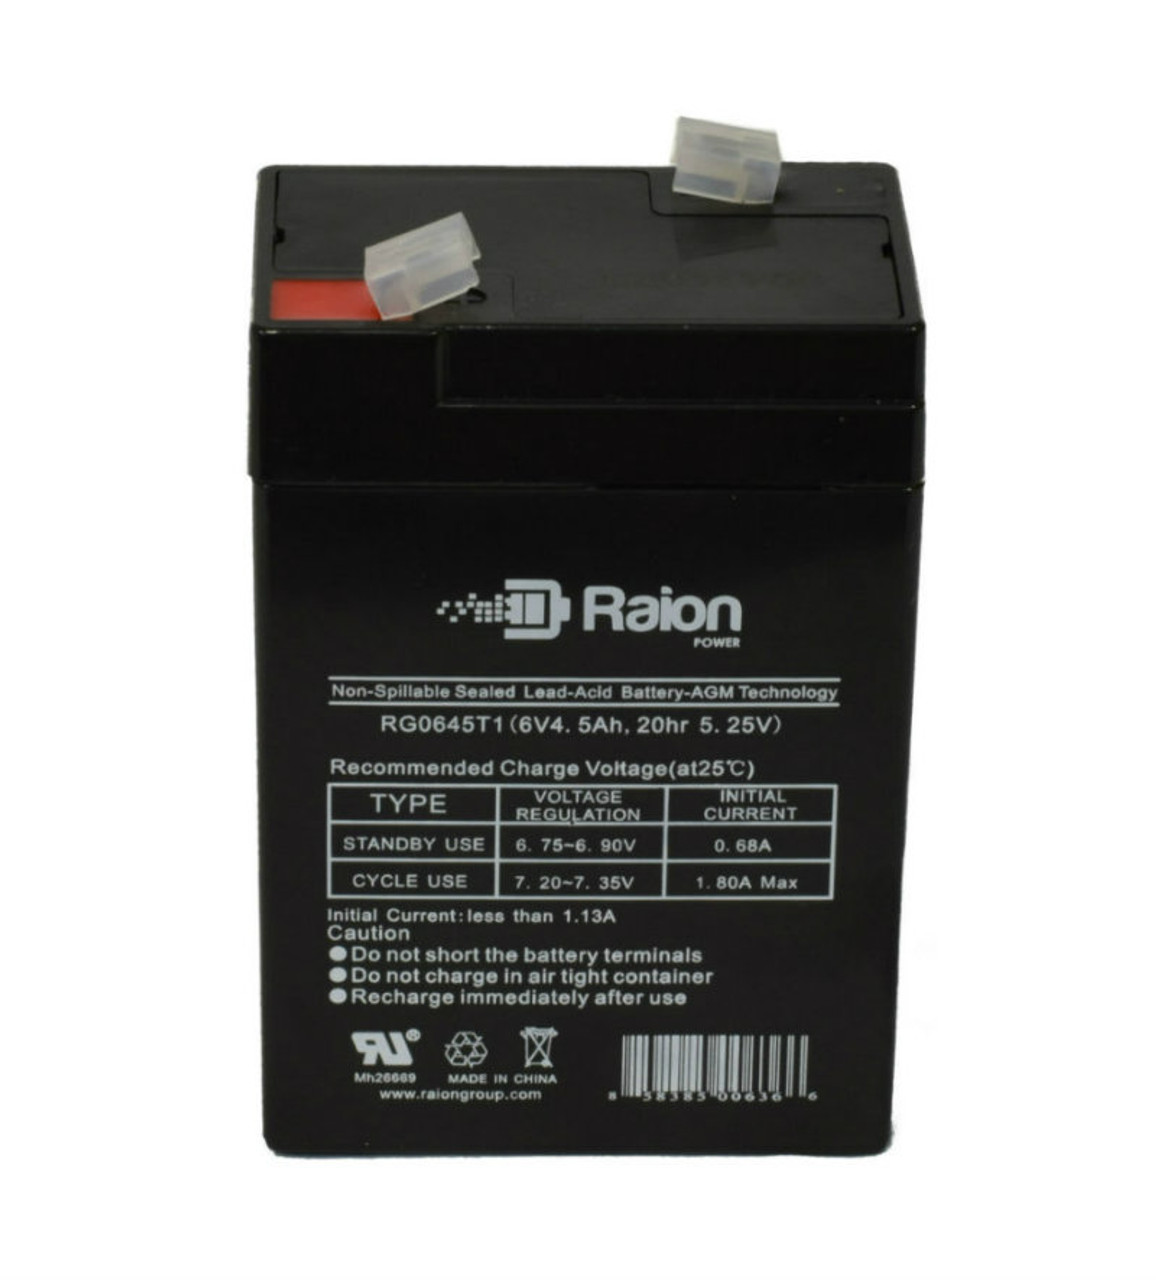 Raion Power RG0645T1 Replacement Battery Cartridge for Ademco 418O